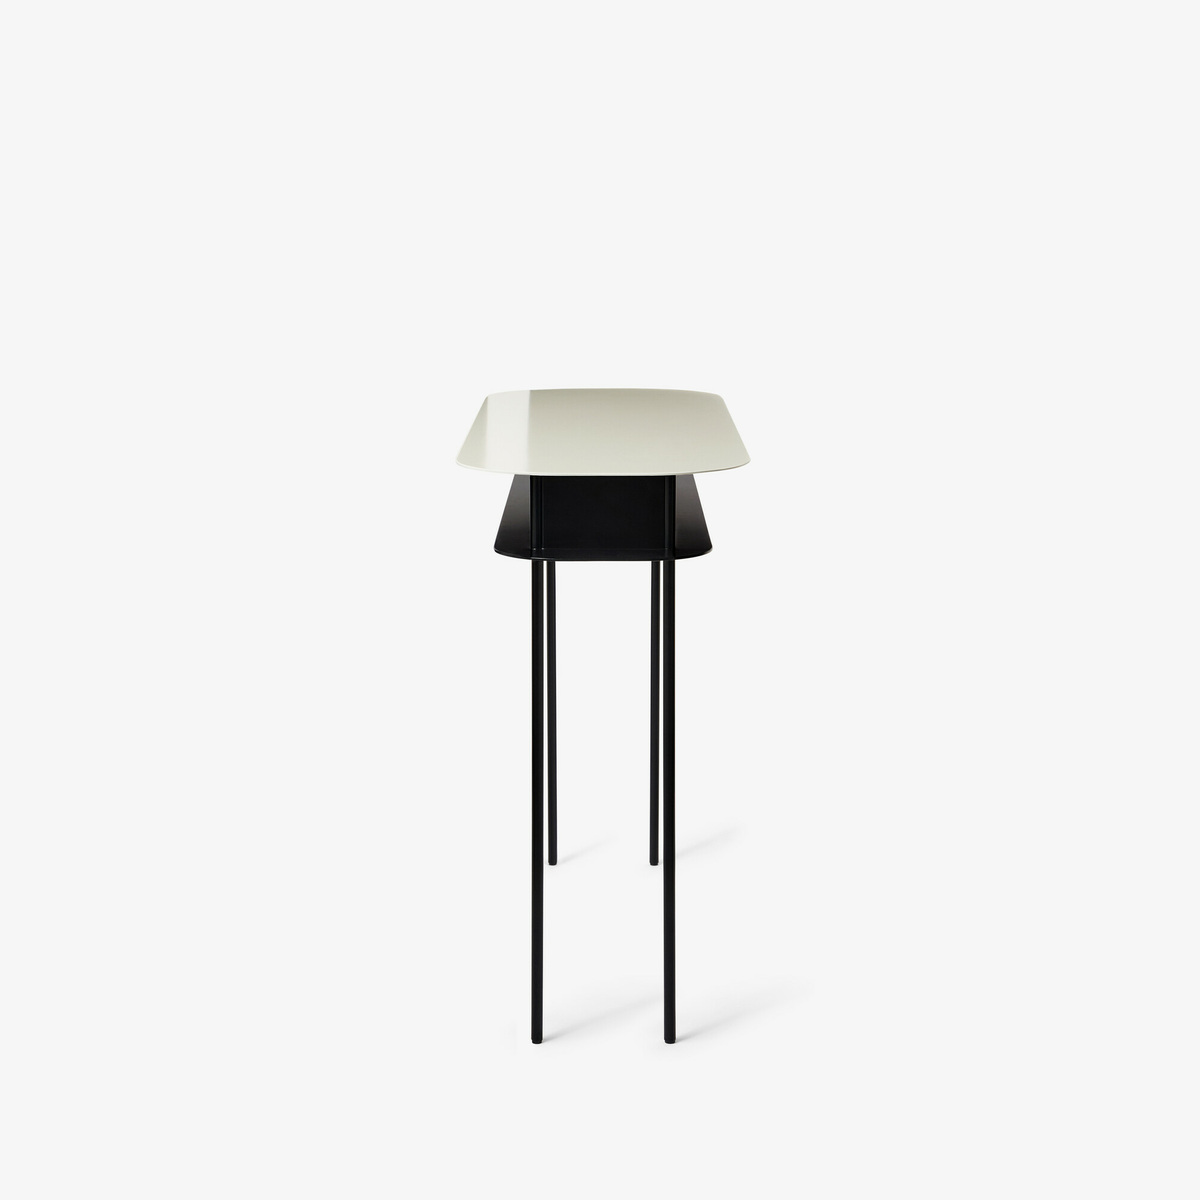 Console Table Tokyo, Off-White/Black - 110 x 40 x 85 cm - Powder coated steel - image 4